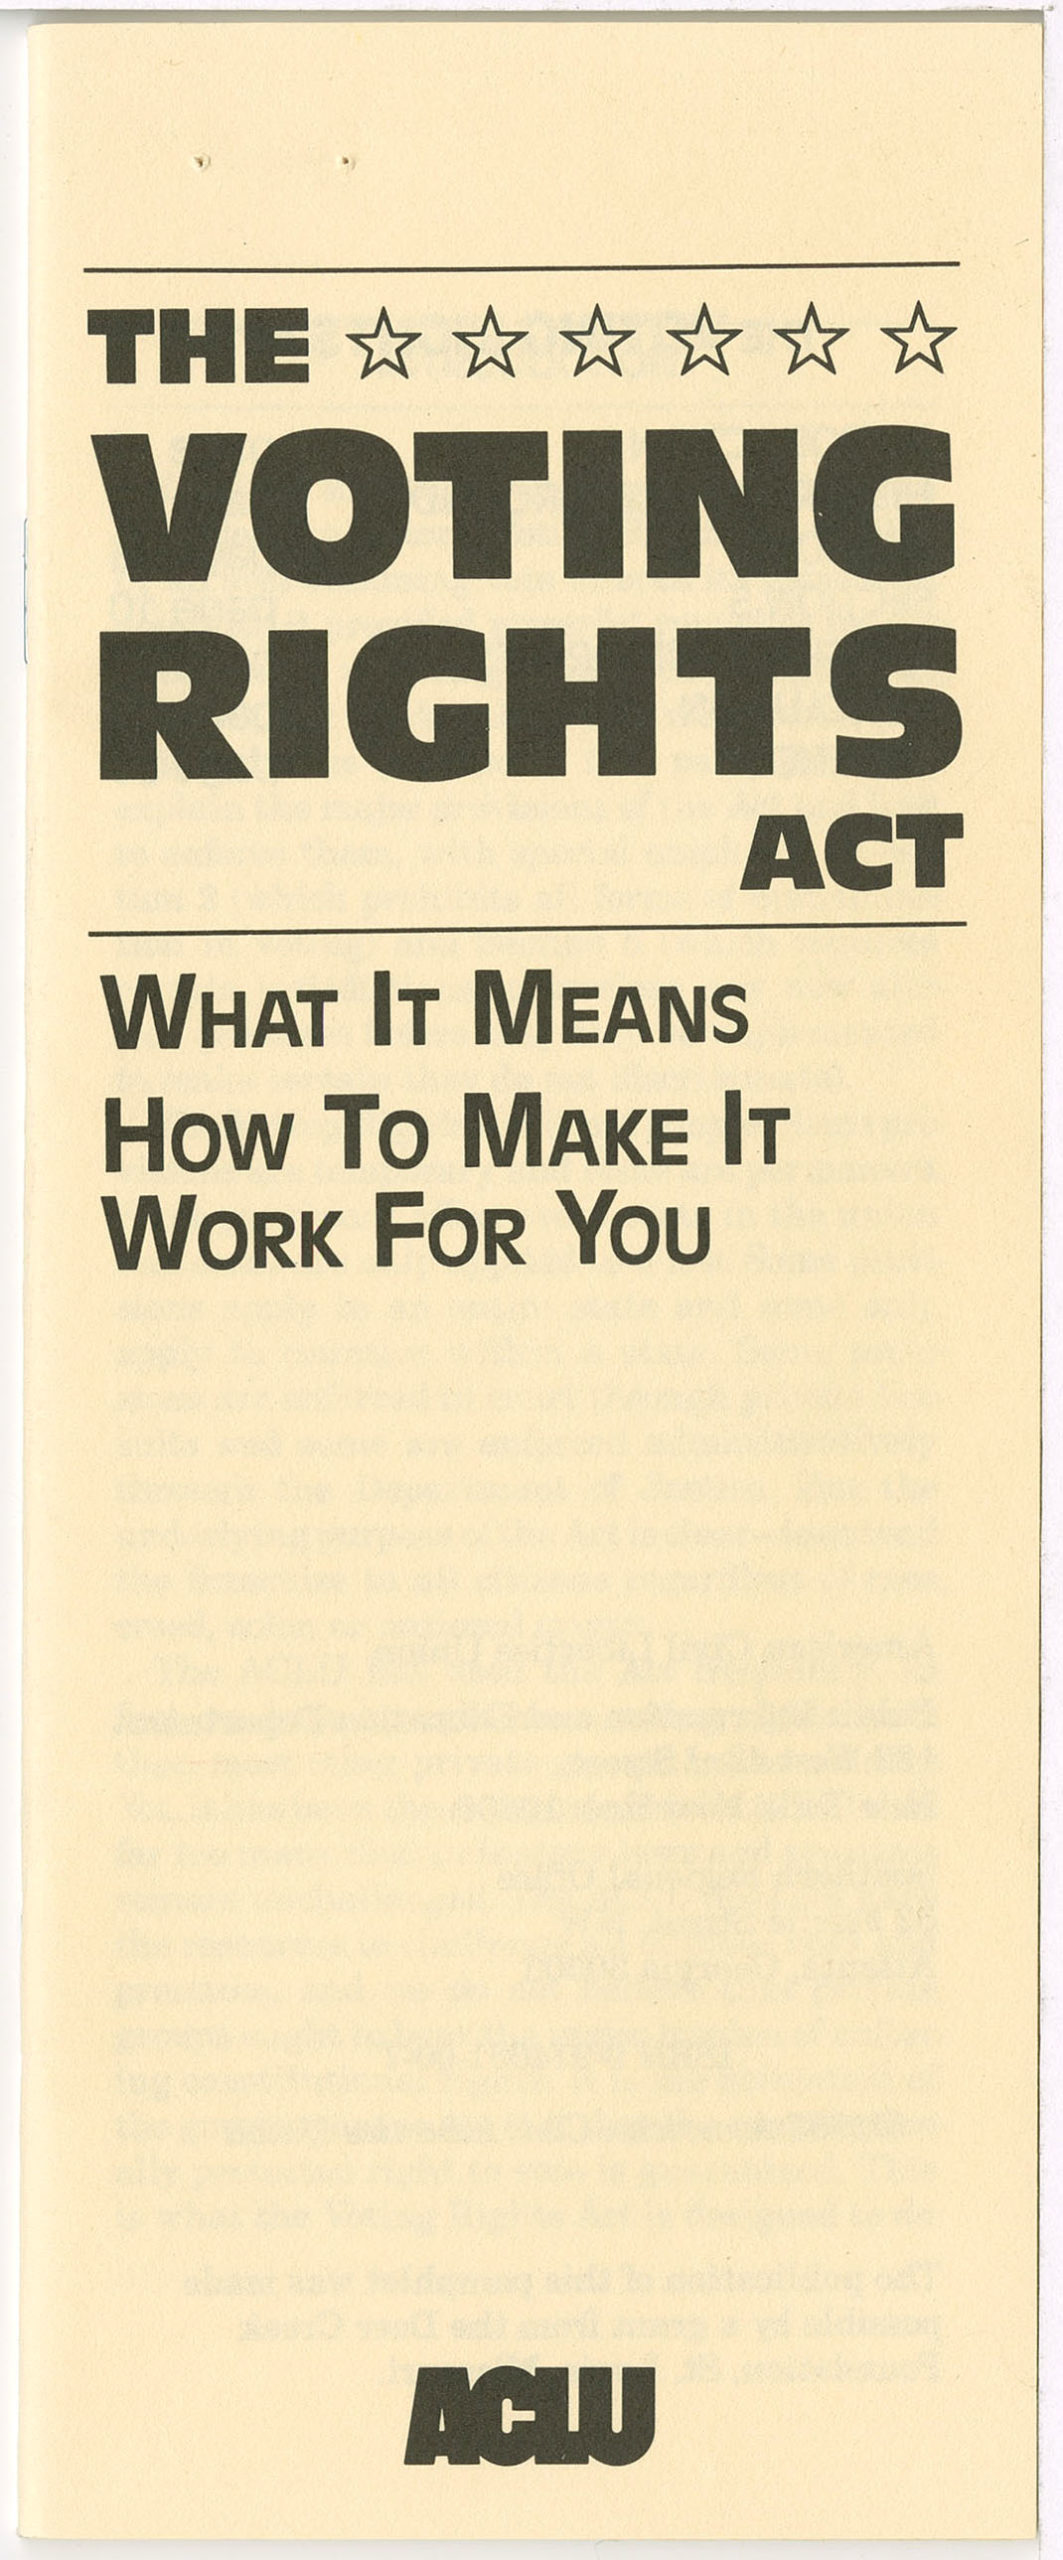 The Voting Rights Act: What It Means How To Make It Work For You, American Civil Liberties Union1983 DecemberJohnson Publishing Company Clippings File Collection